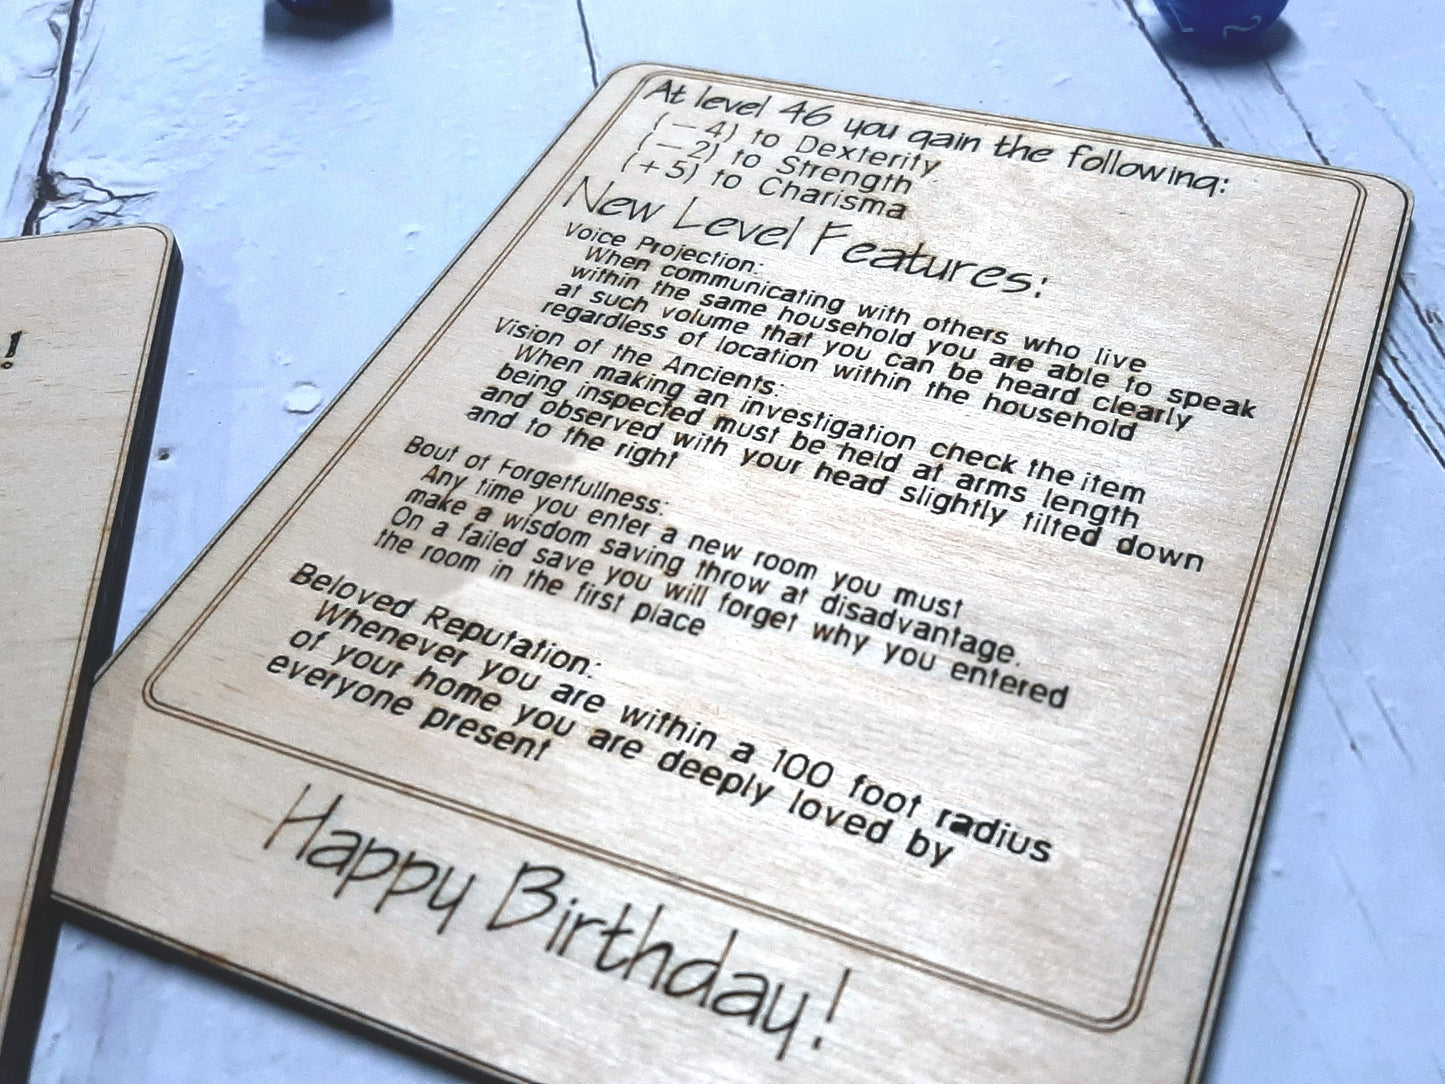 Birthday Card - Congratulations! You've Leveled Up!   Humorous birthday card, engraved wood, gamer gift, rpg, role-playing games d&d dnd